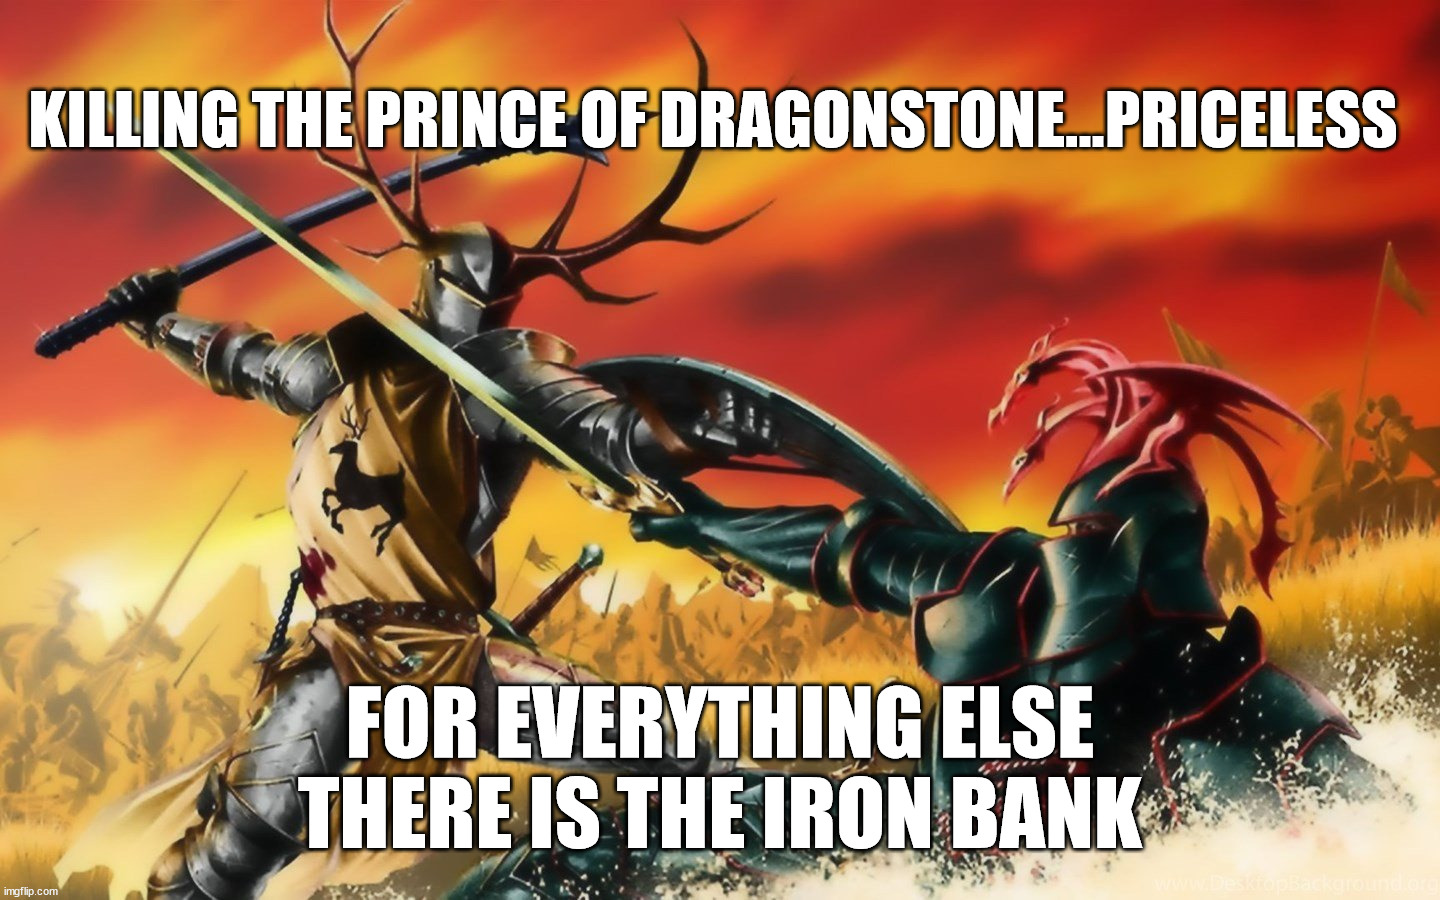 The Crown is more than six million gold pieces in debt | KILLING THE PRINCE OF DRAGONSTONE...PRICELESS; FOR EVERYTHING ELSE THERE IS THE IRON BANK | image tagged in asoiaf,a song of ice and fire,robert baratheon,the iron bank,money | made w/ Imgflip meme maker